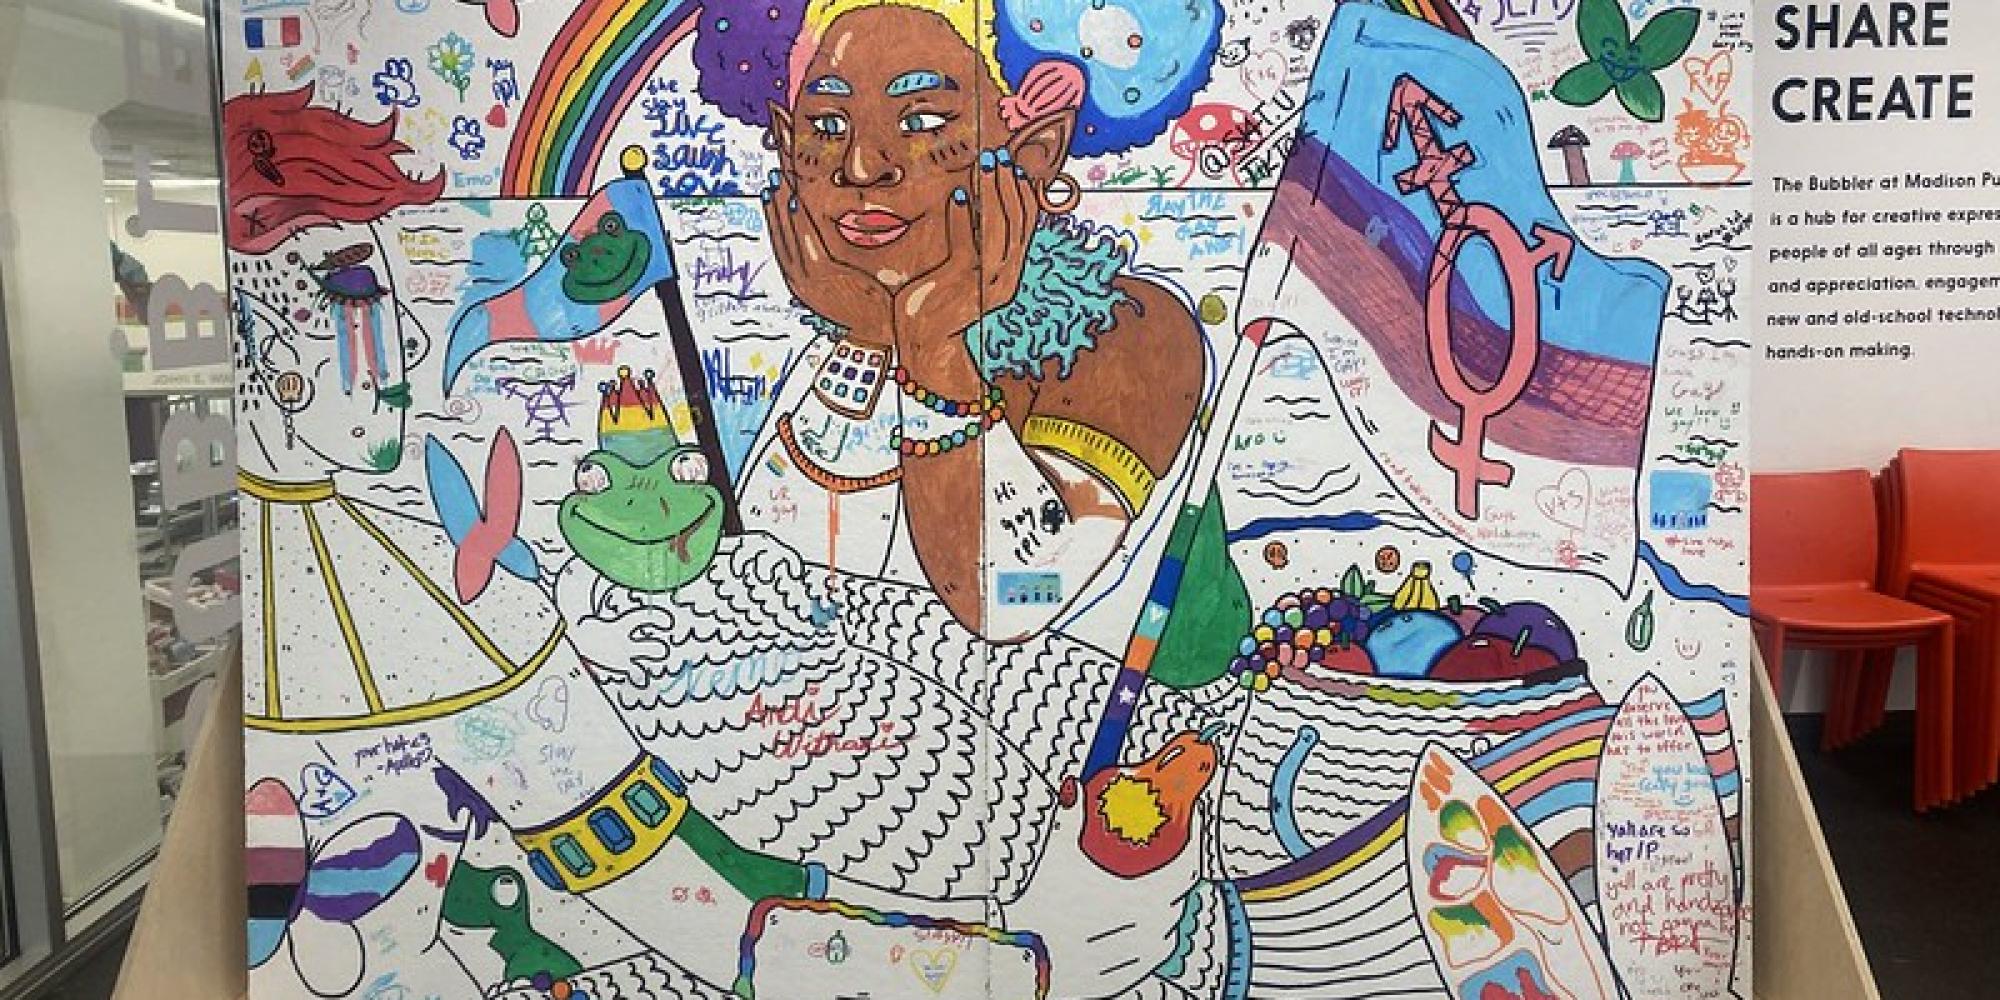 Coloring mural at pride prom event at Central Library